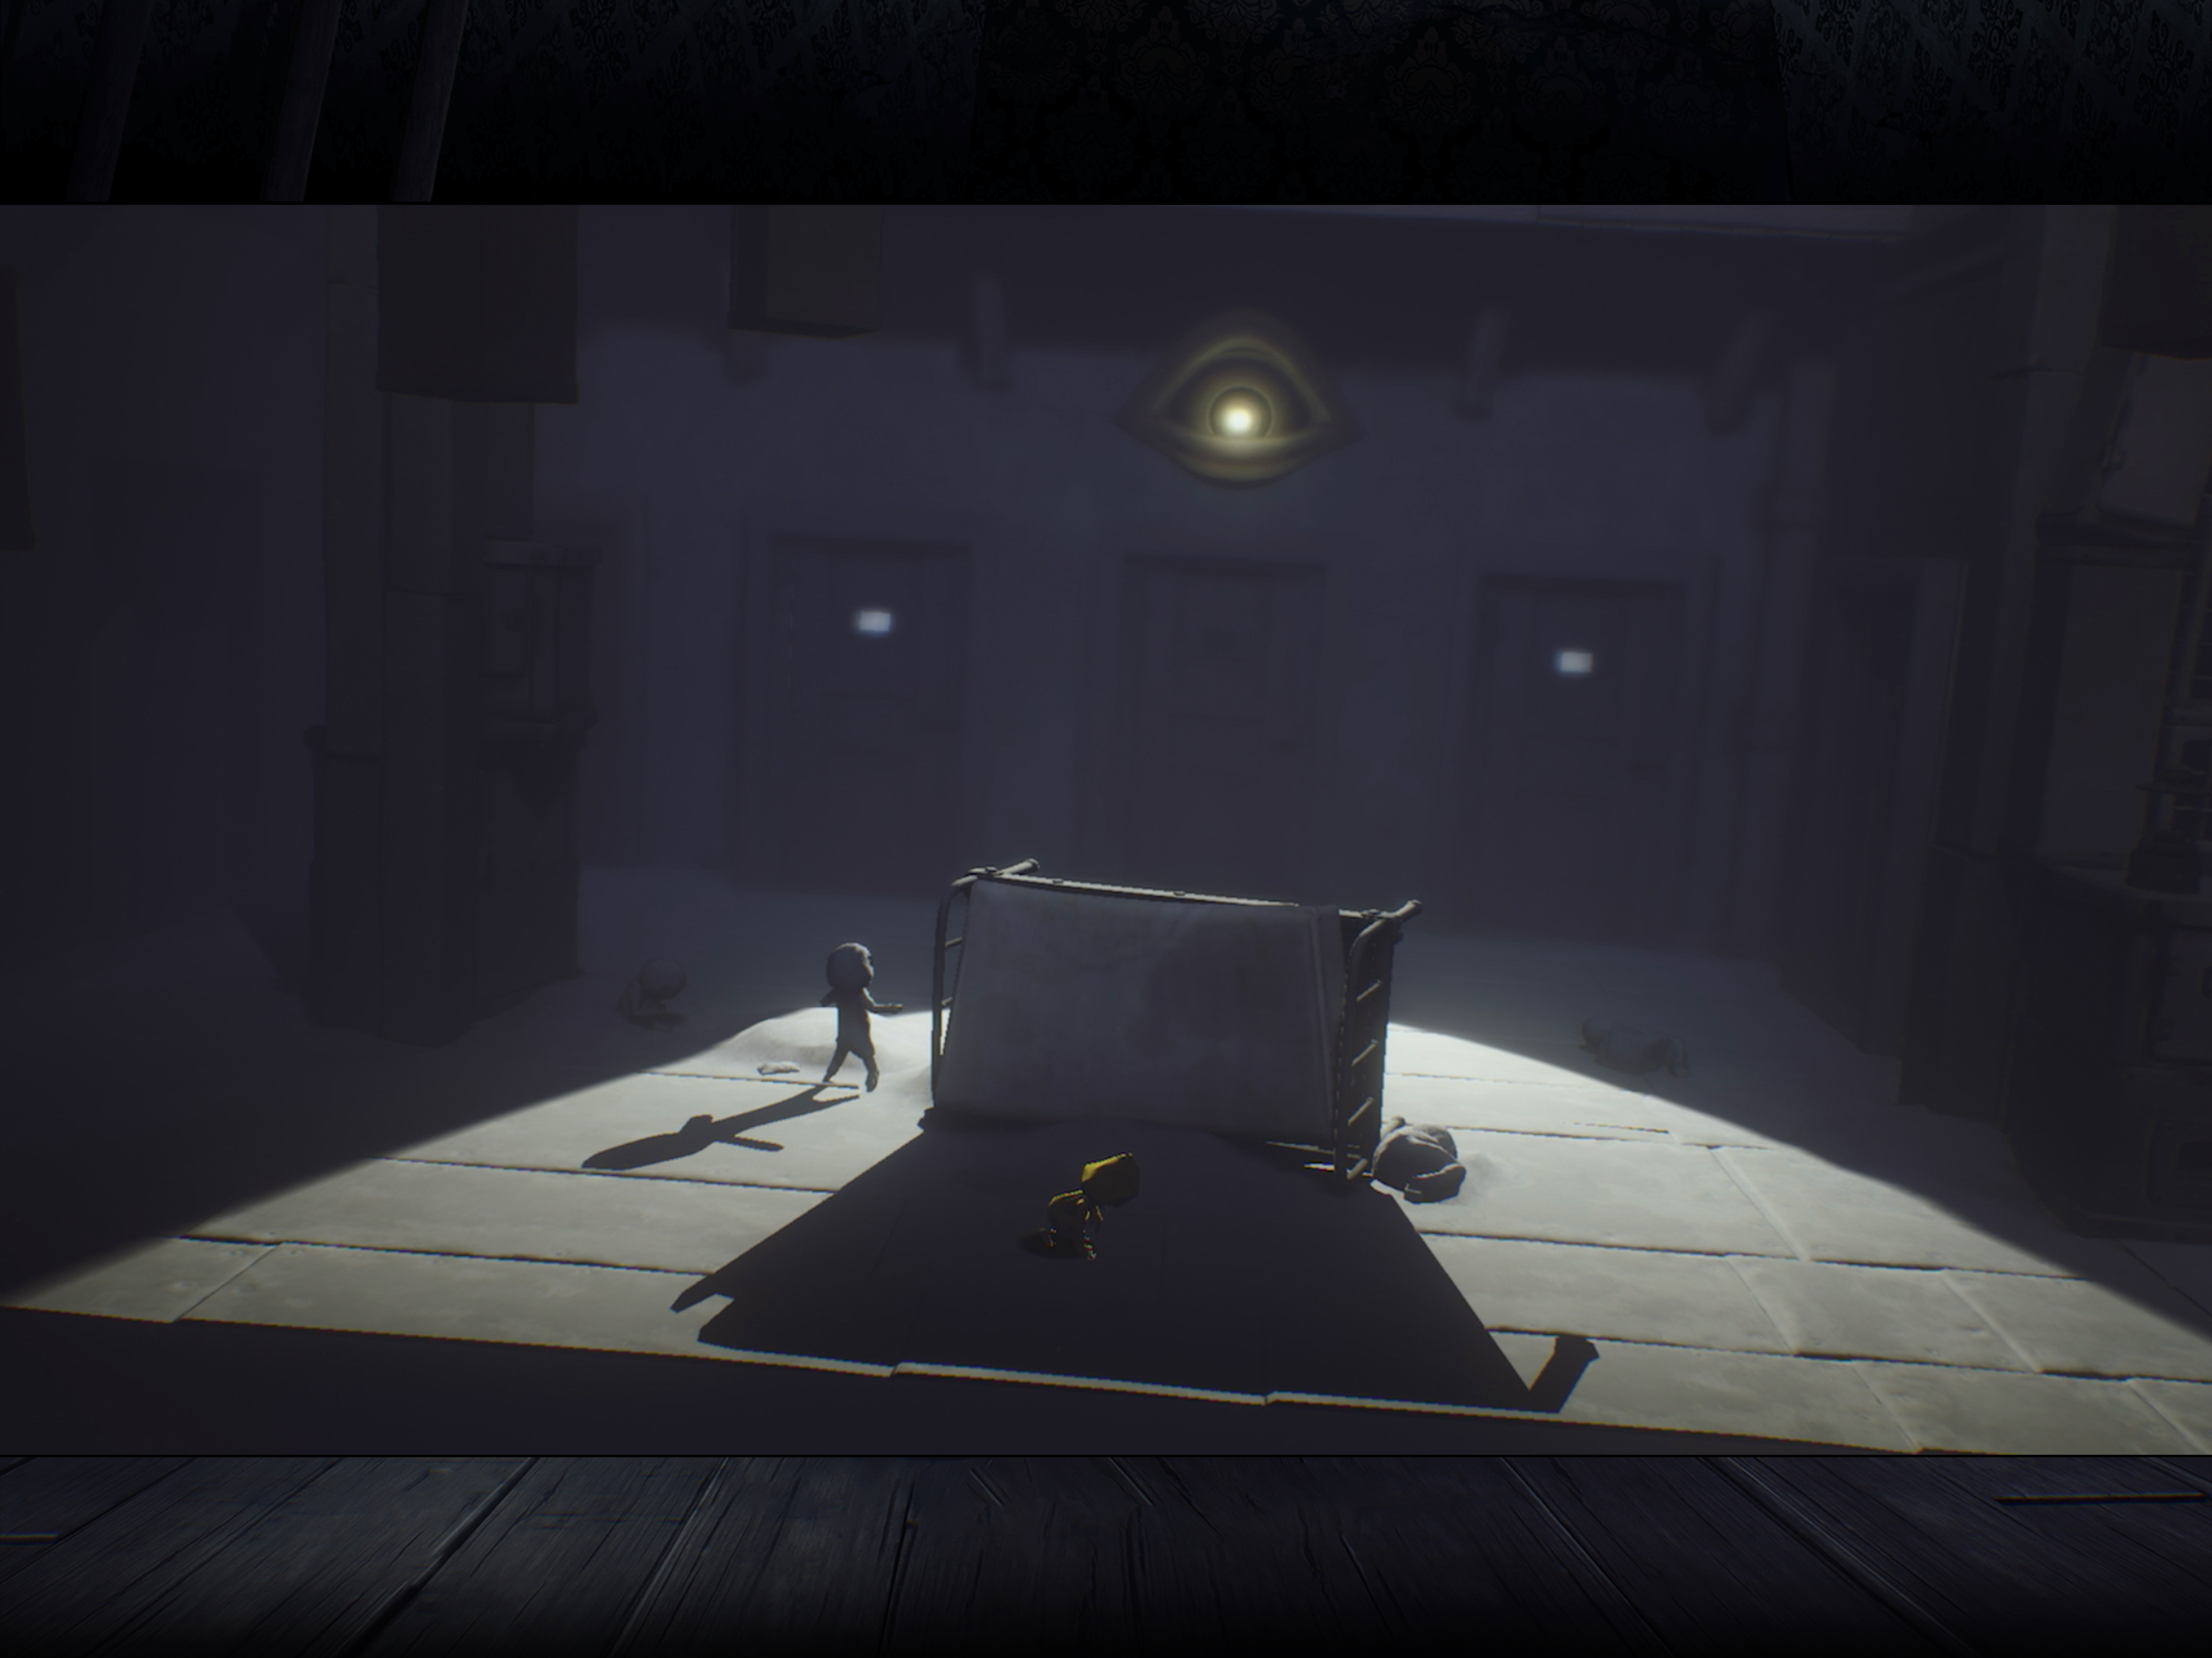 Little Nightmares 2 APK Download For Android Free